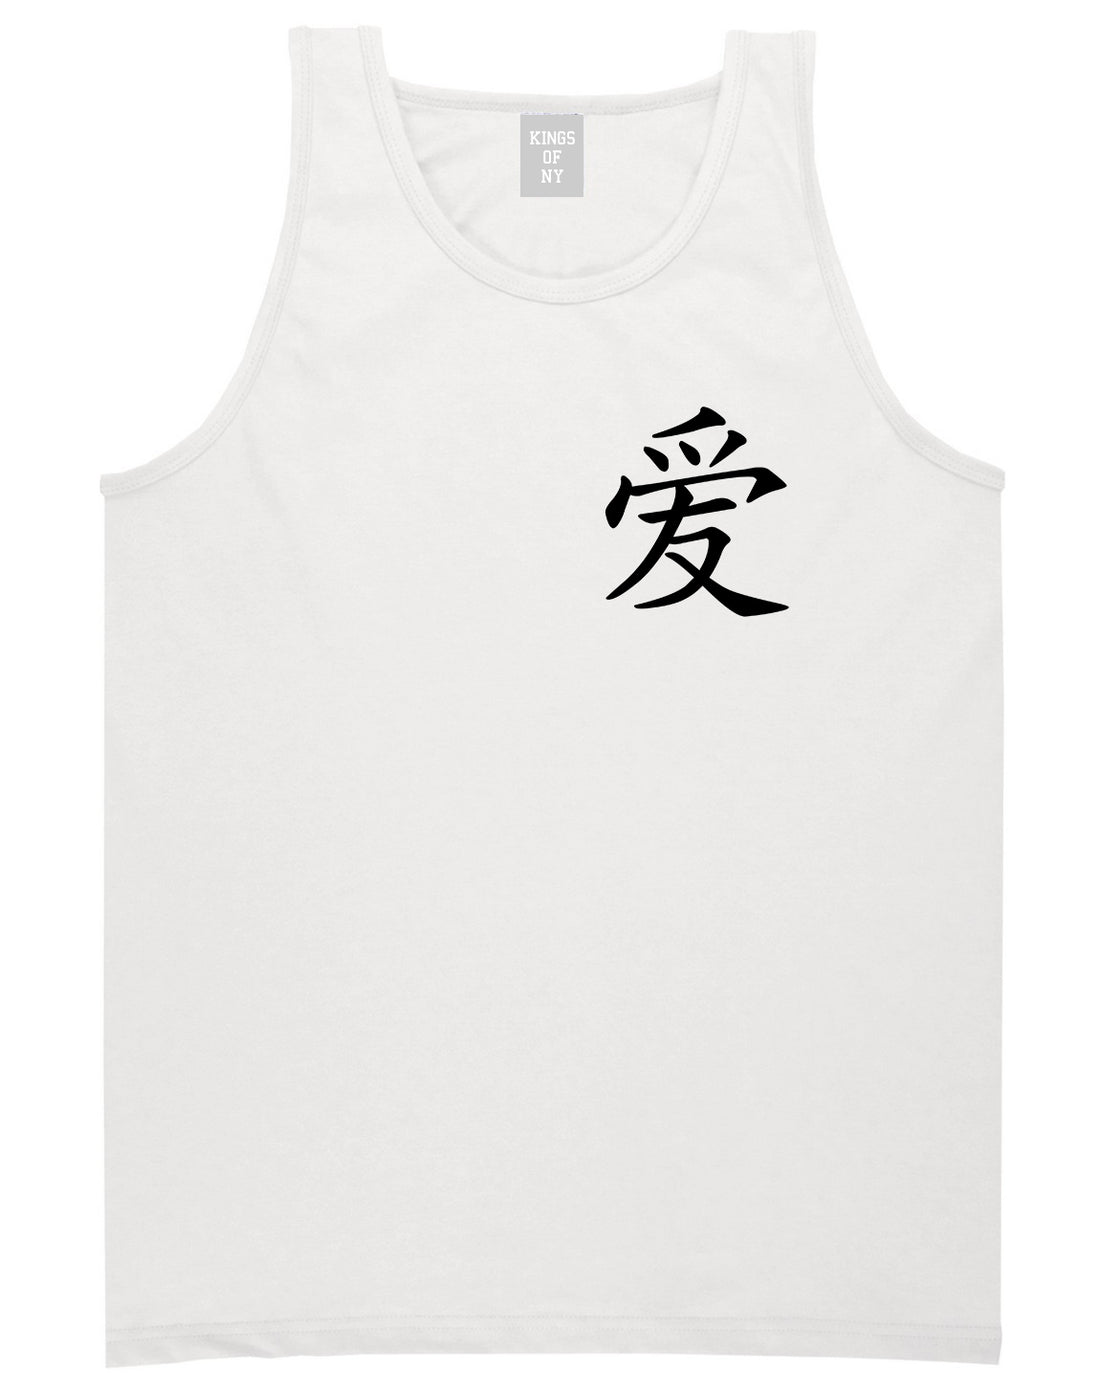 Chinese Symbol For Love Chest White Tank Top Shirt by Kings Of NY